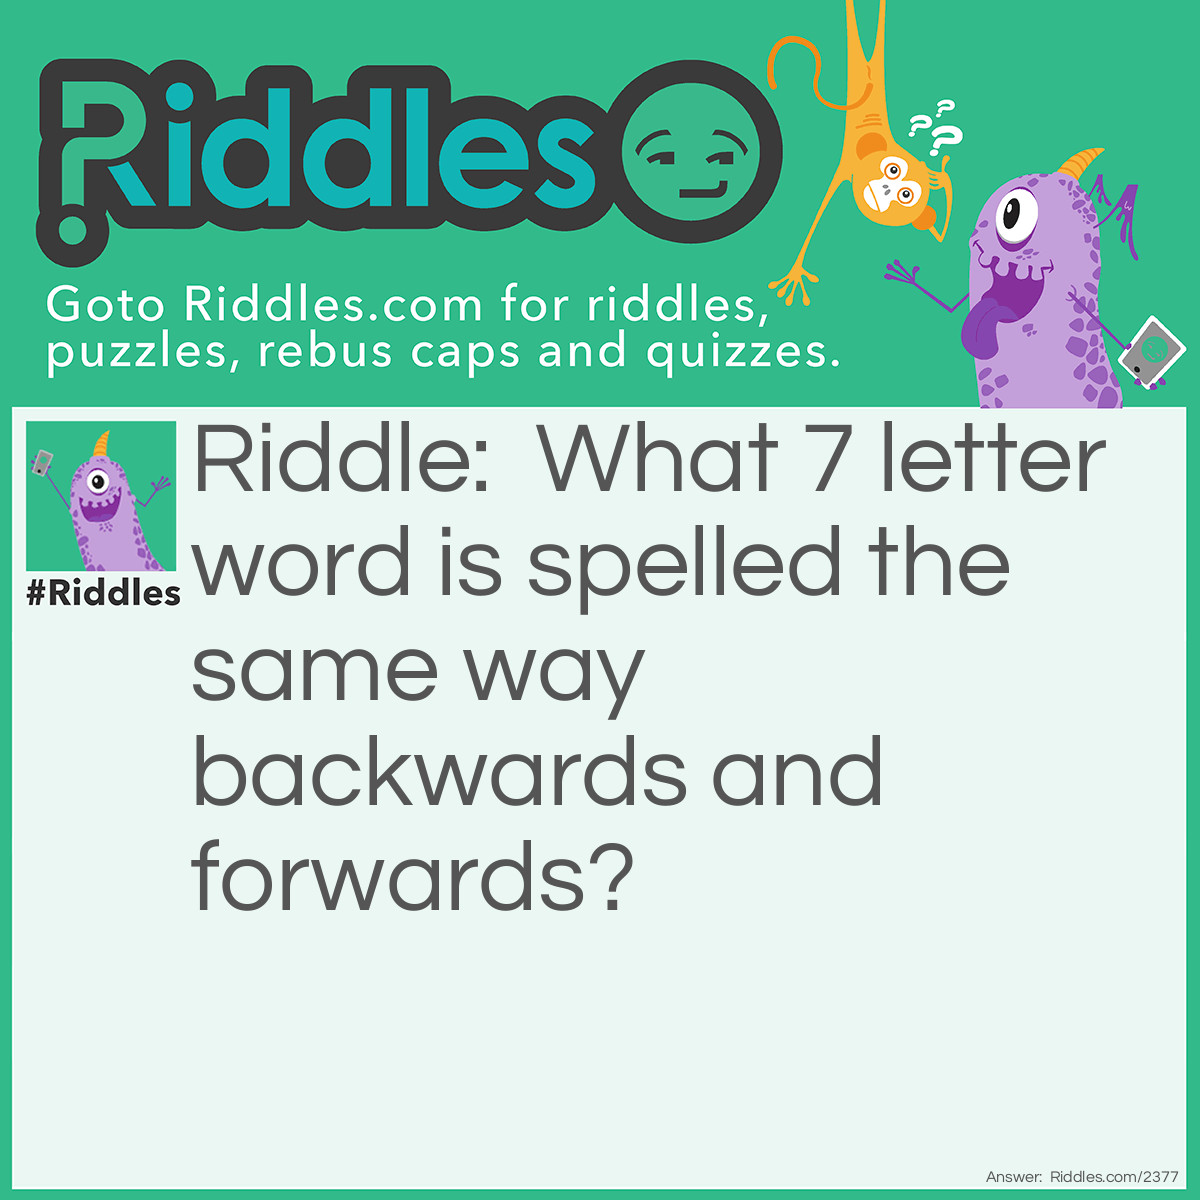 Riddle: What 7 letter word is spelled the same way backwards and forwards? Answer: Racecar.